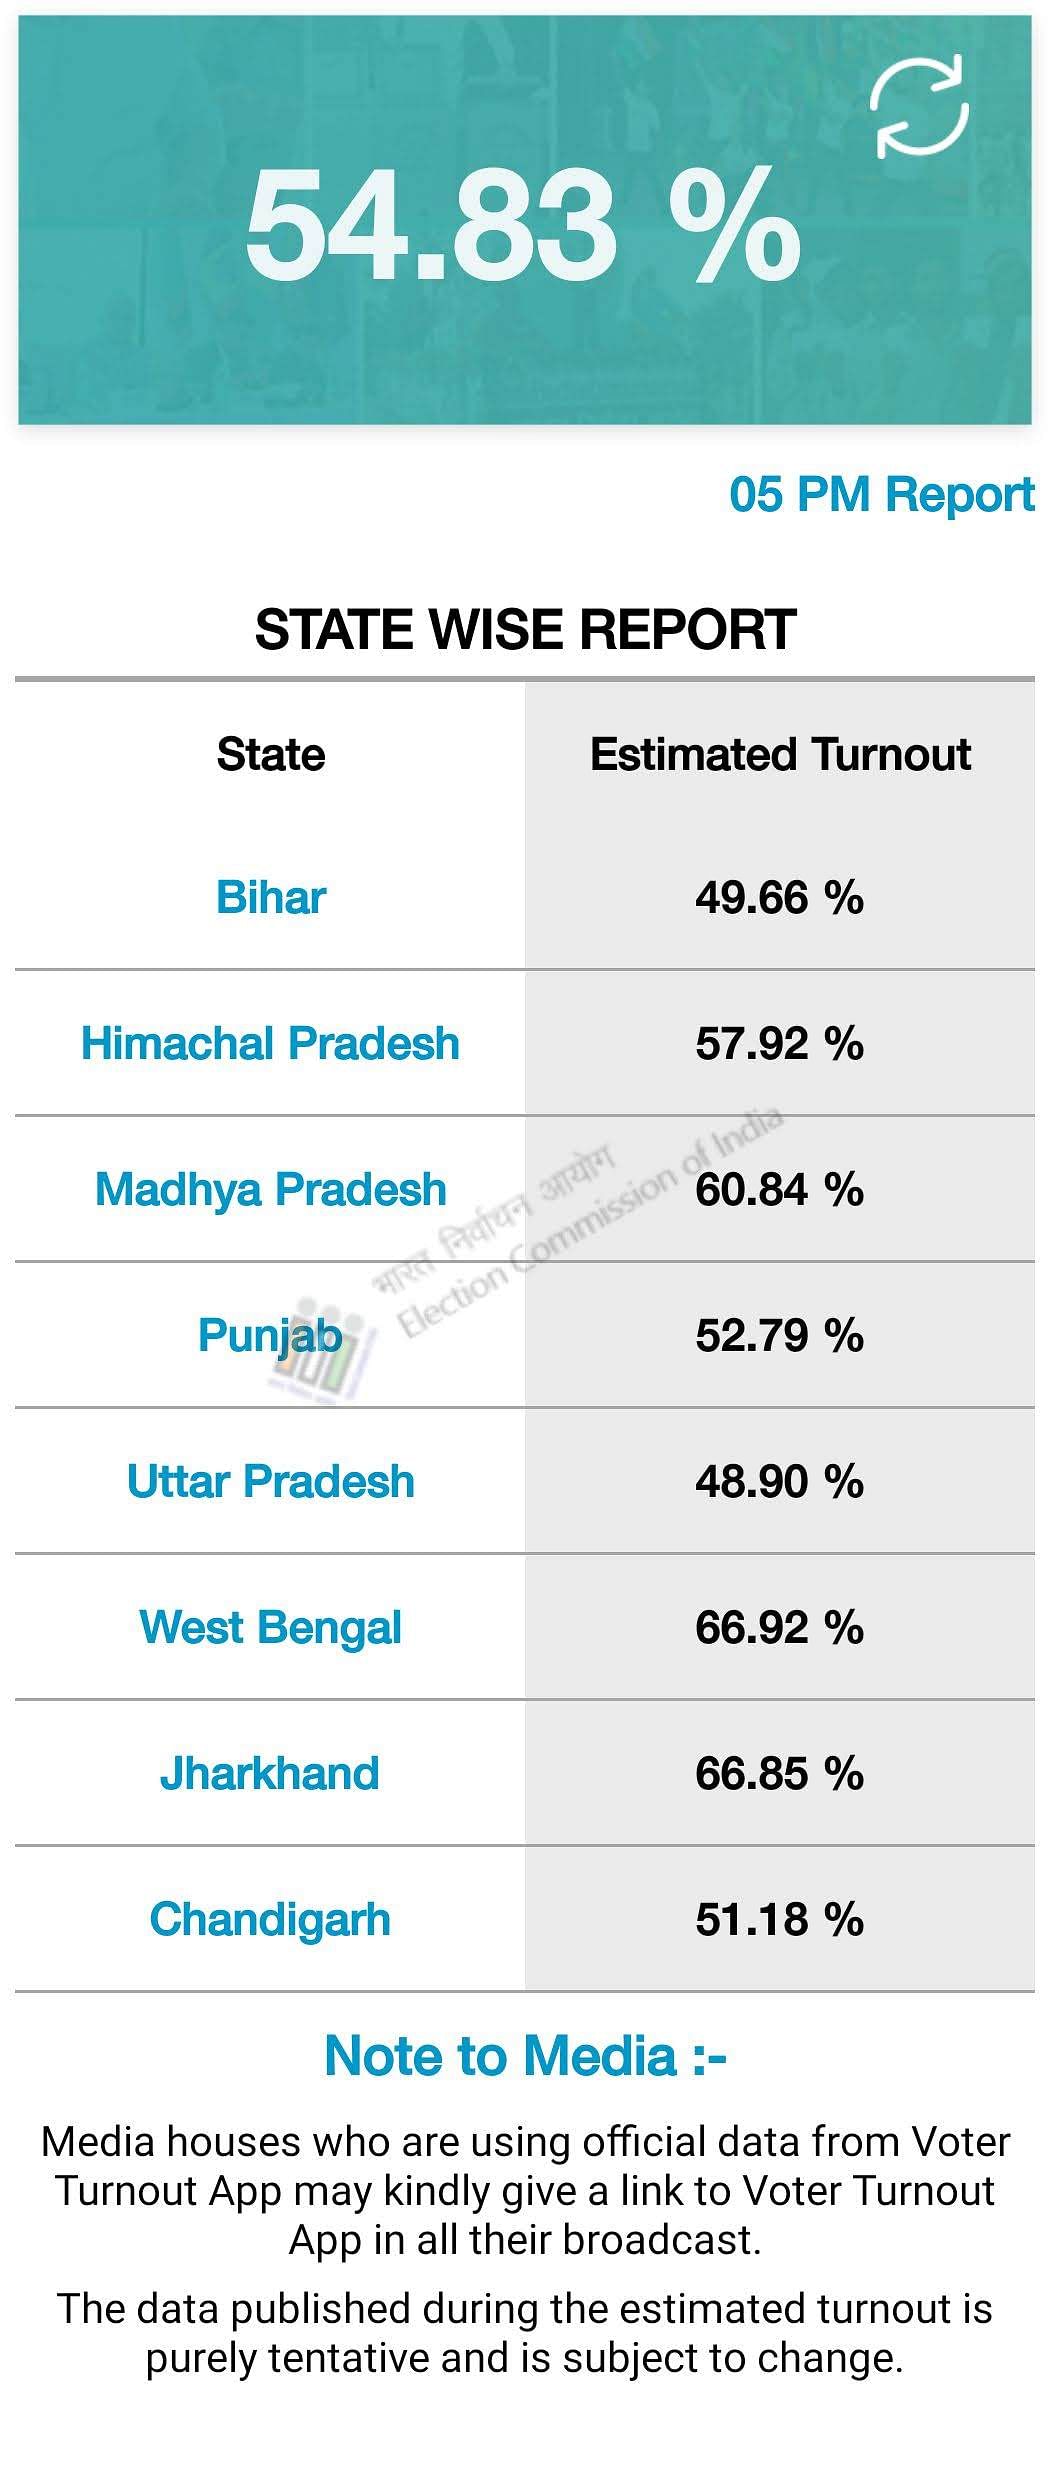 Catch all the live updates here for voting percentages through the day as 59 constituencies in 8 states go to polls.